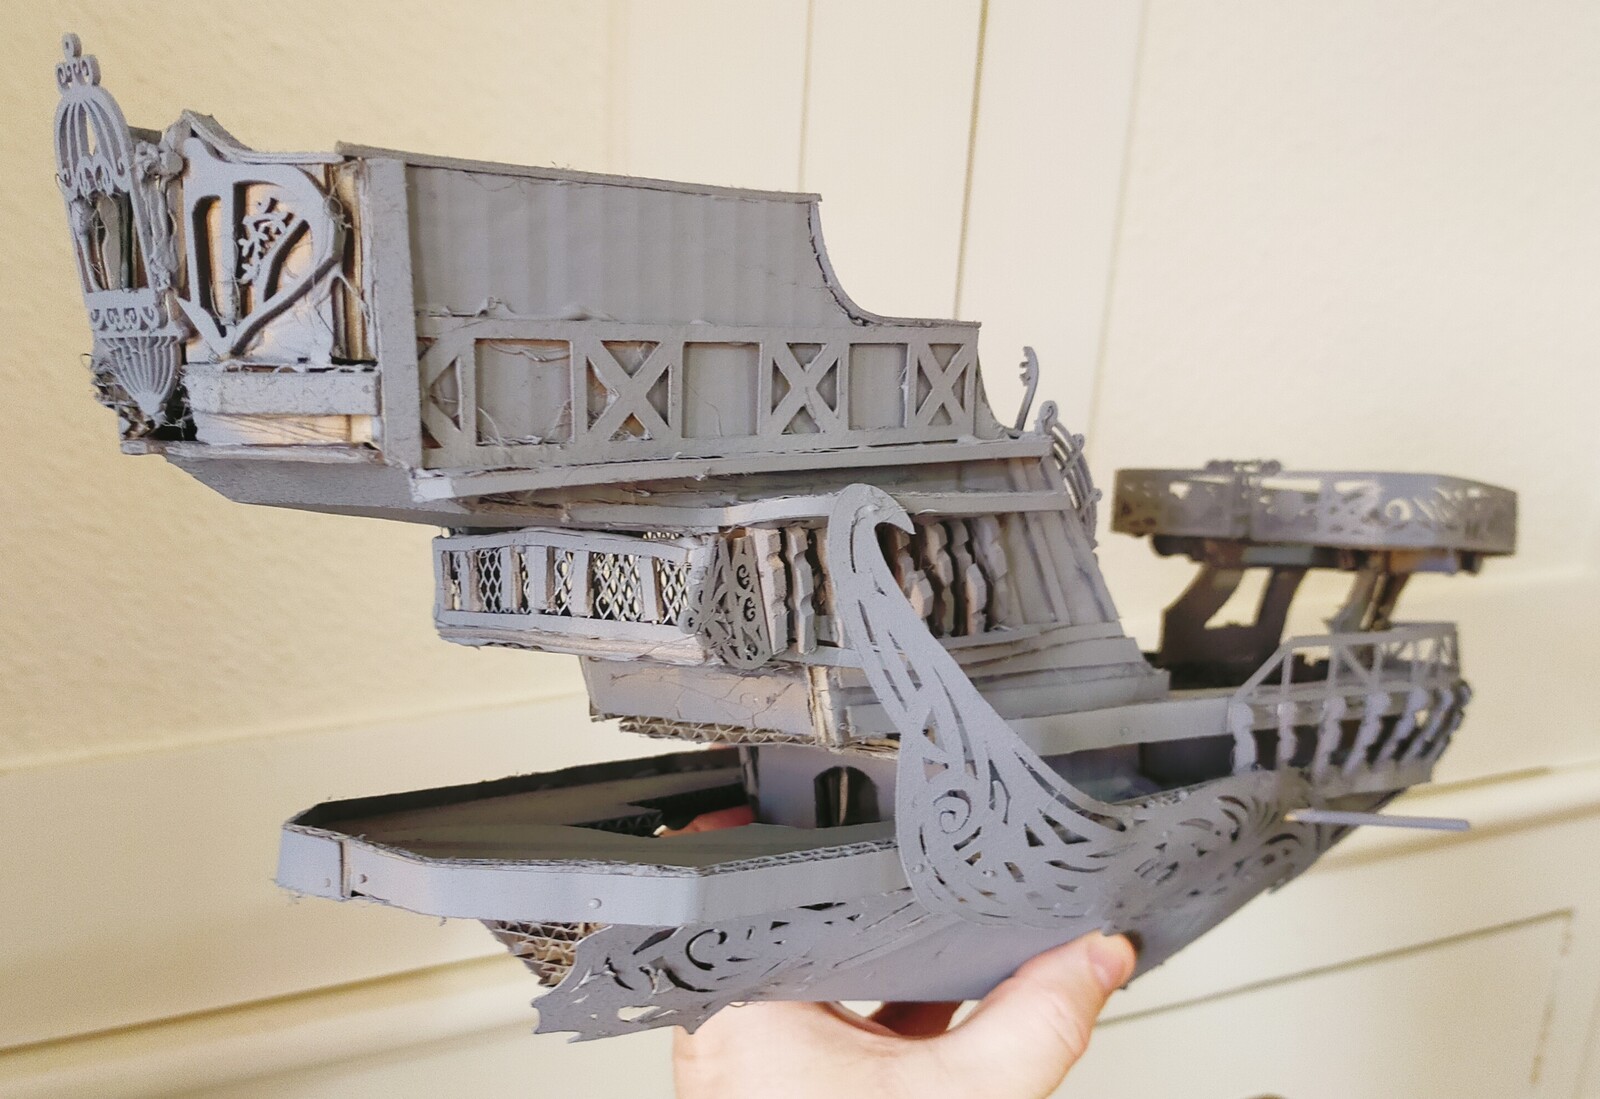 View of the part primed model showing the stern design.